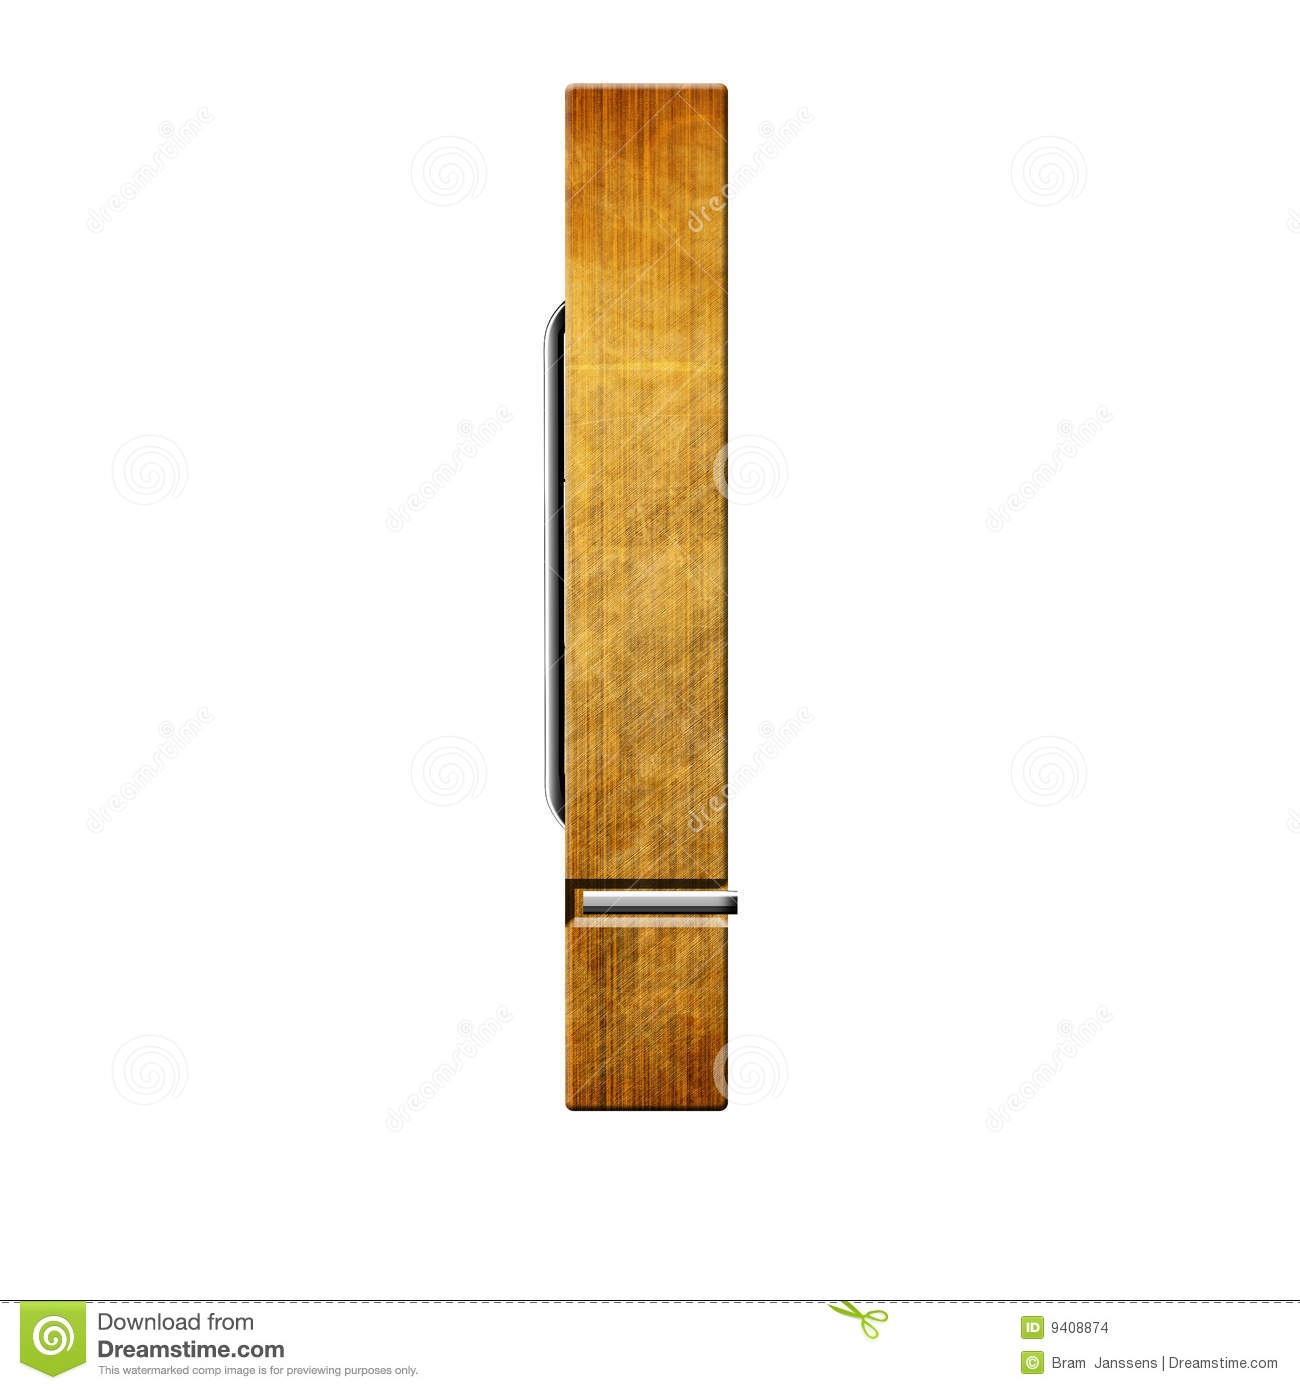 Clothespin clipart wooden peg. Beautiful clothes 